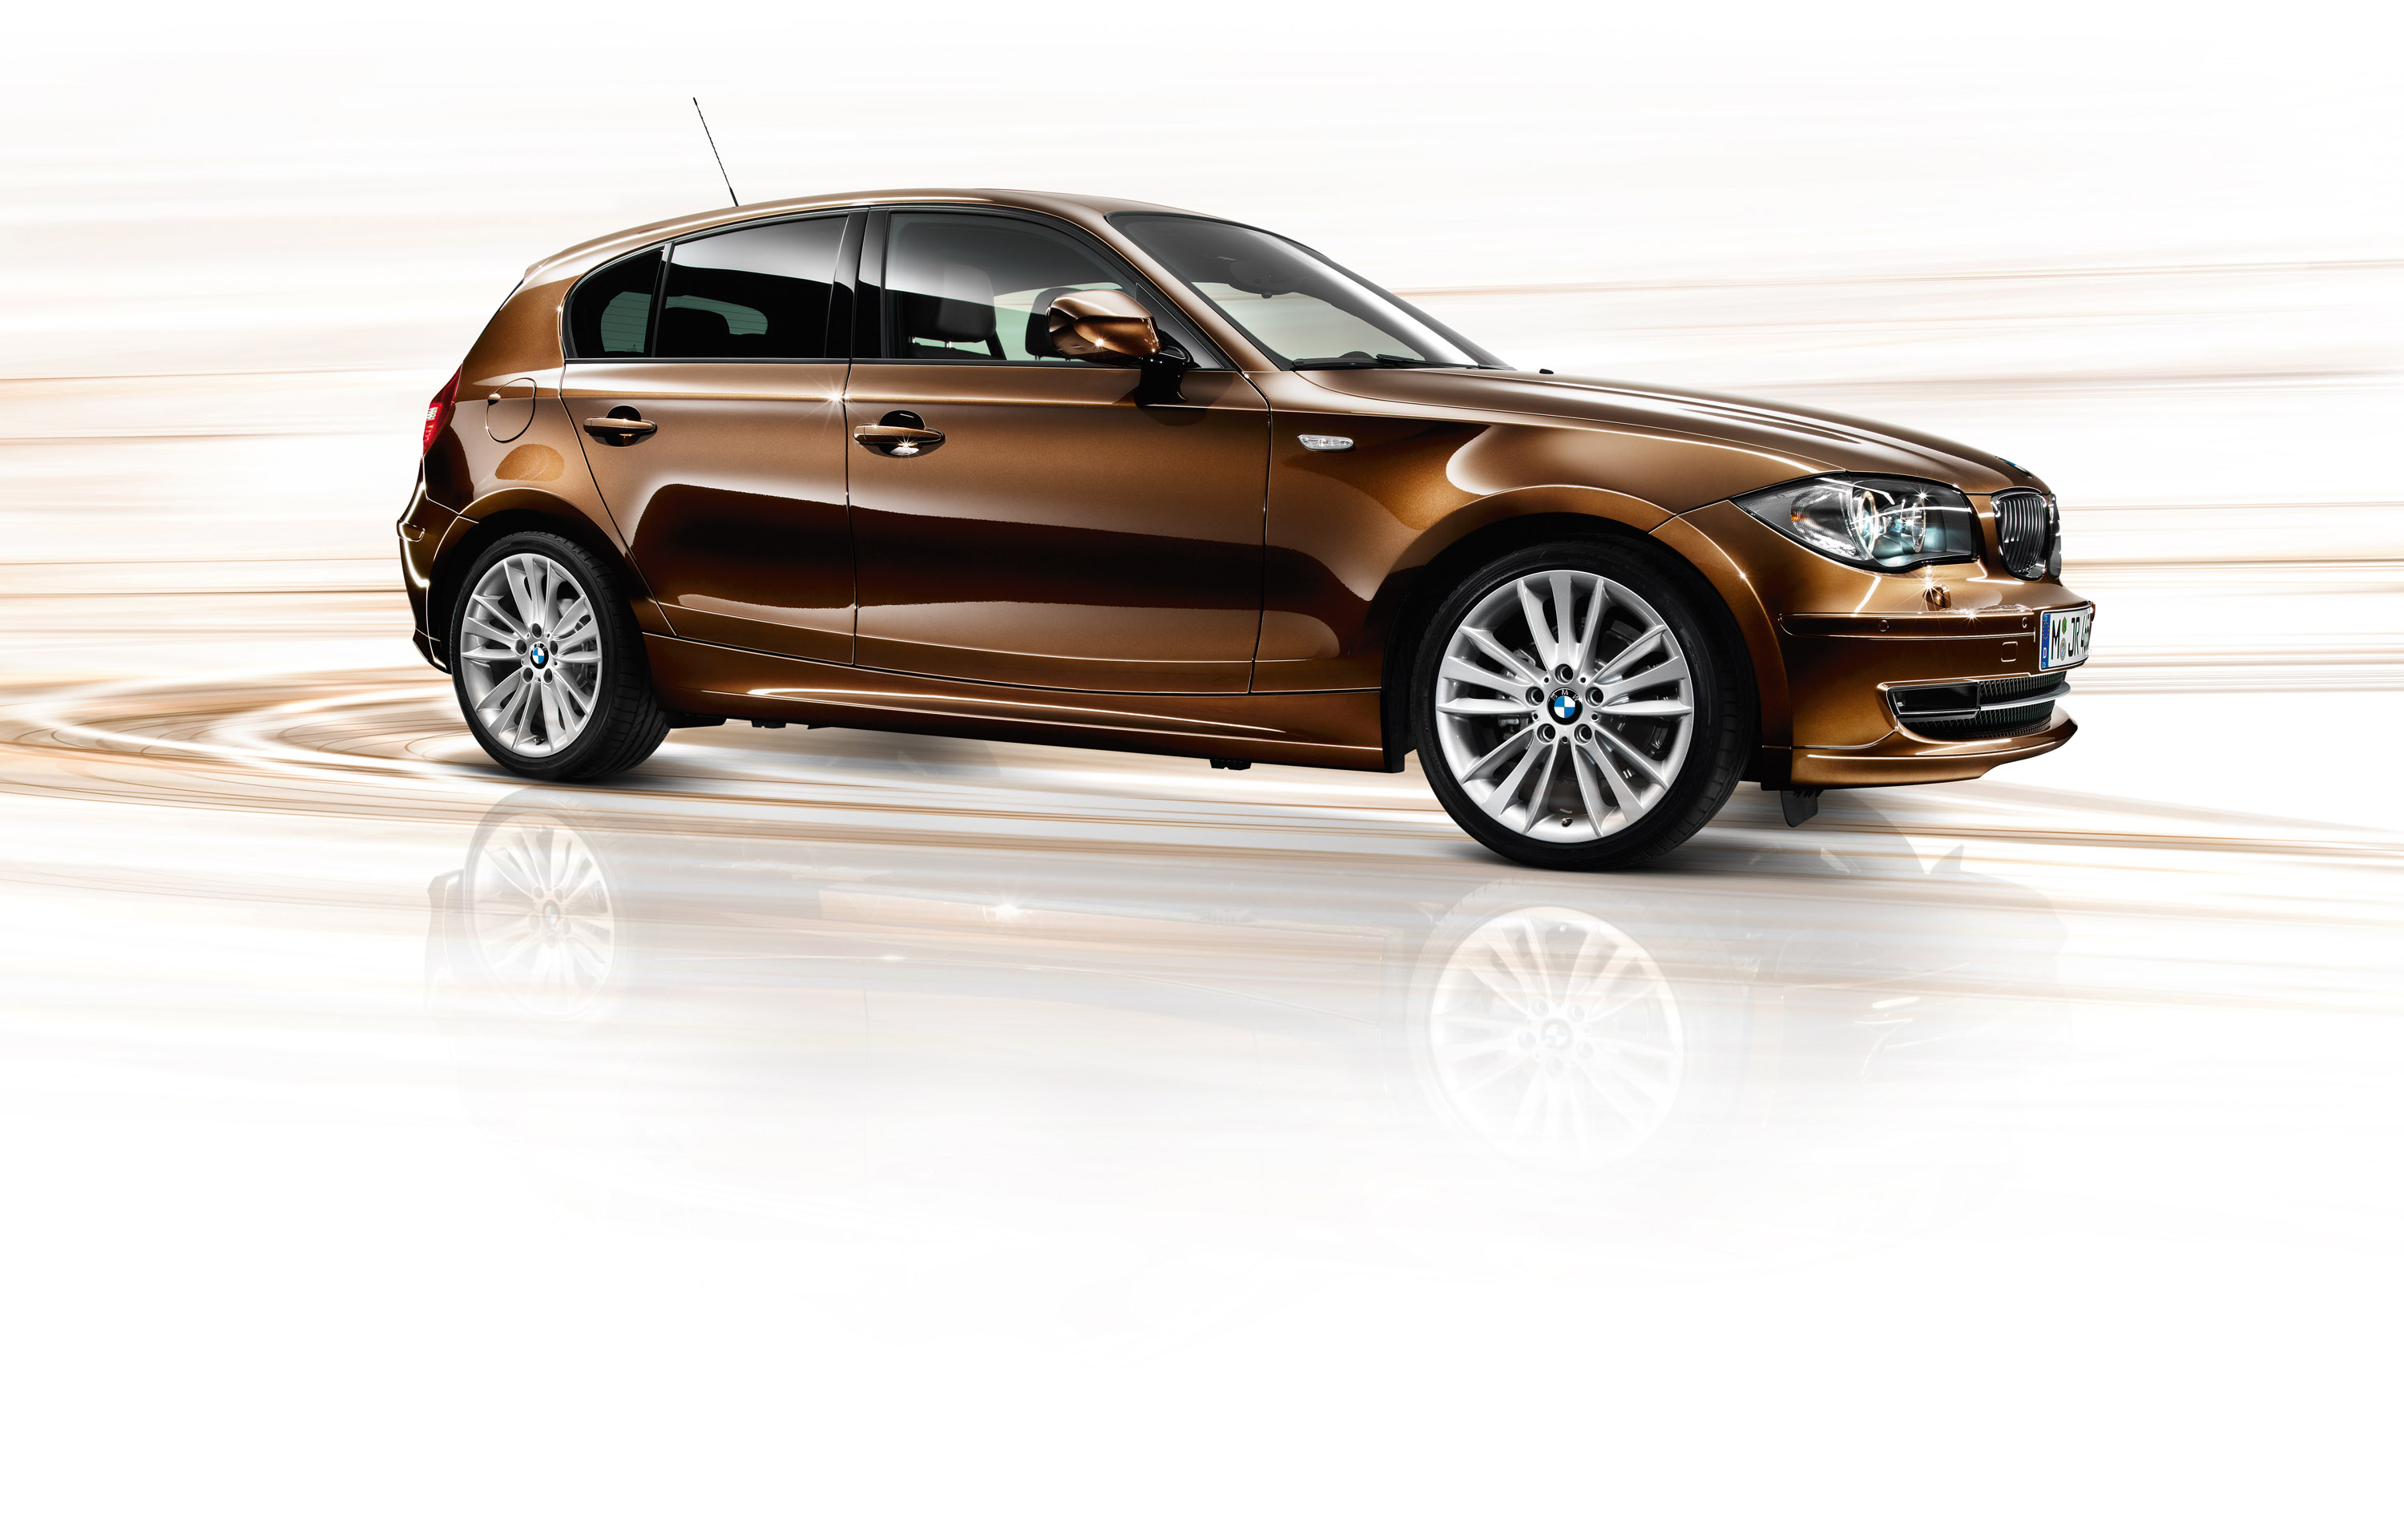 BMW 1 Series Lifestyle and Sport Editions